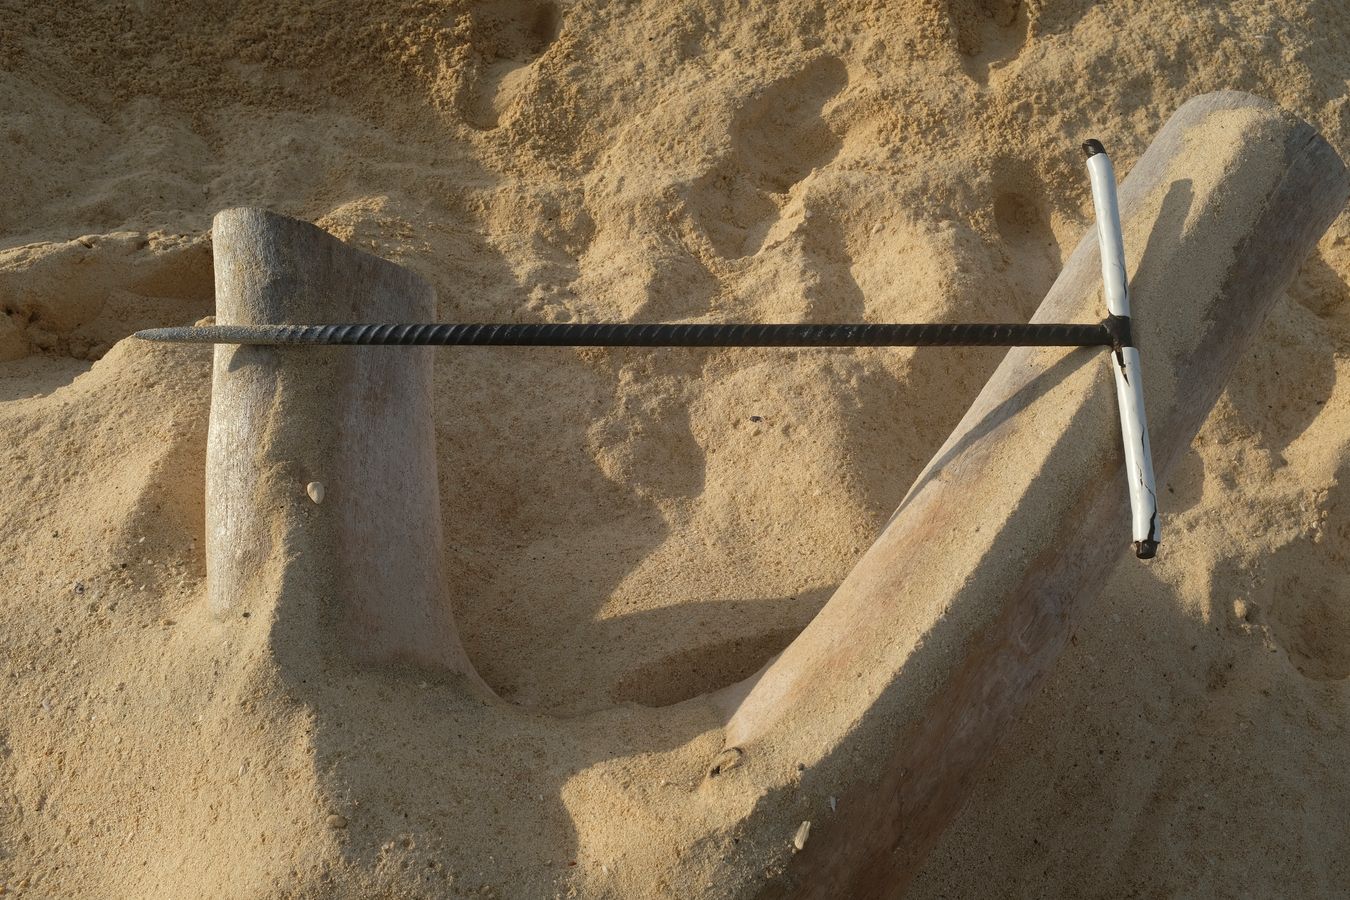 Iron tool made to measure in an artisan way that the rangers use to locate the exact place where the nest with the sea turtle eggs are.